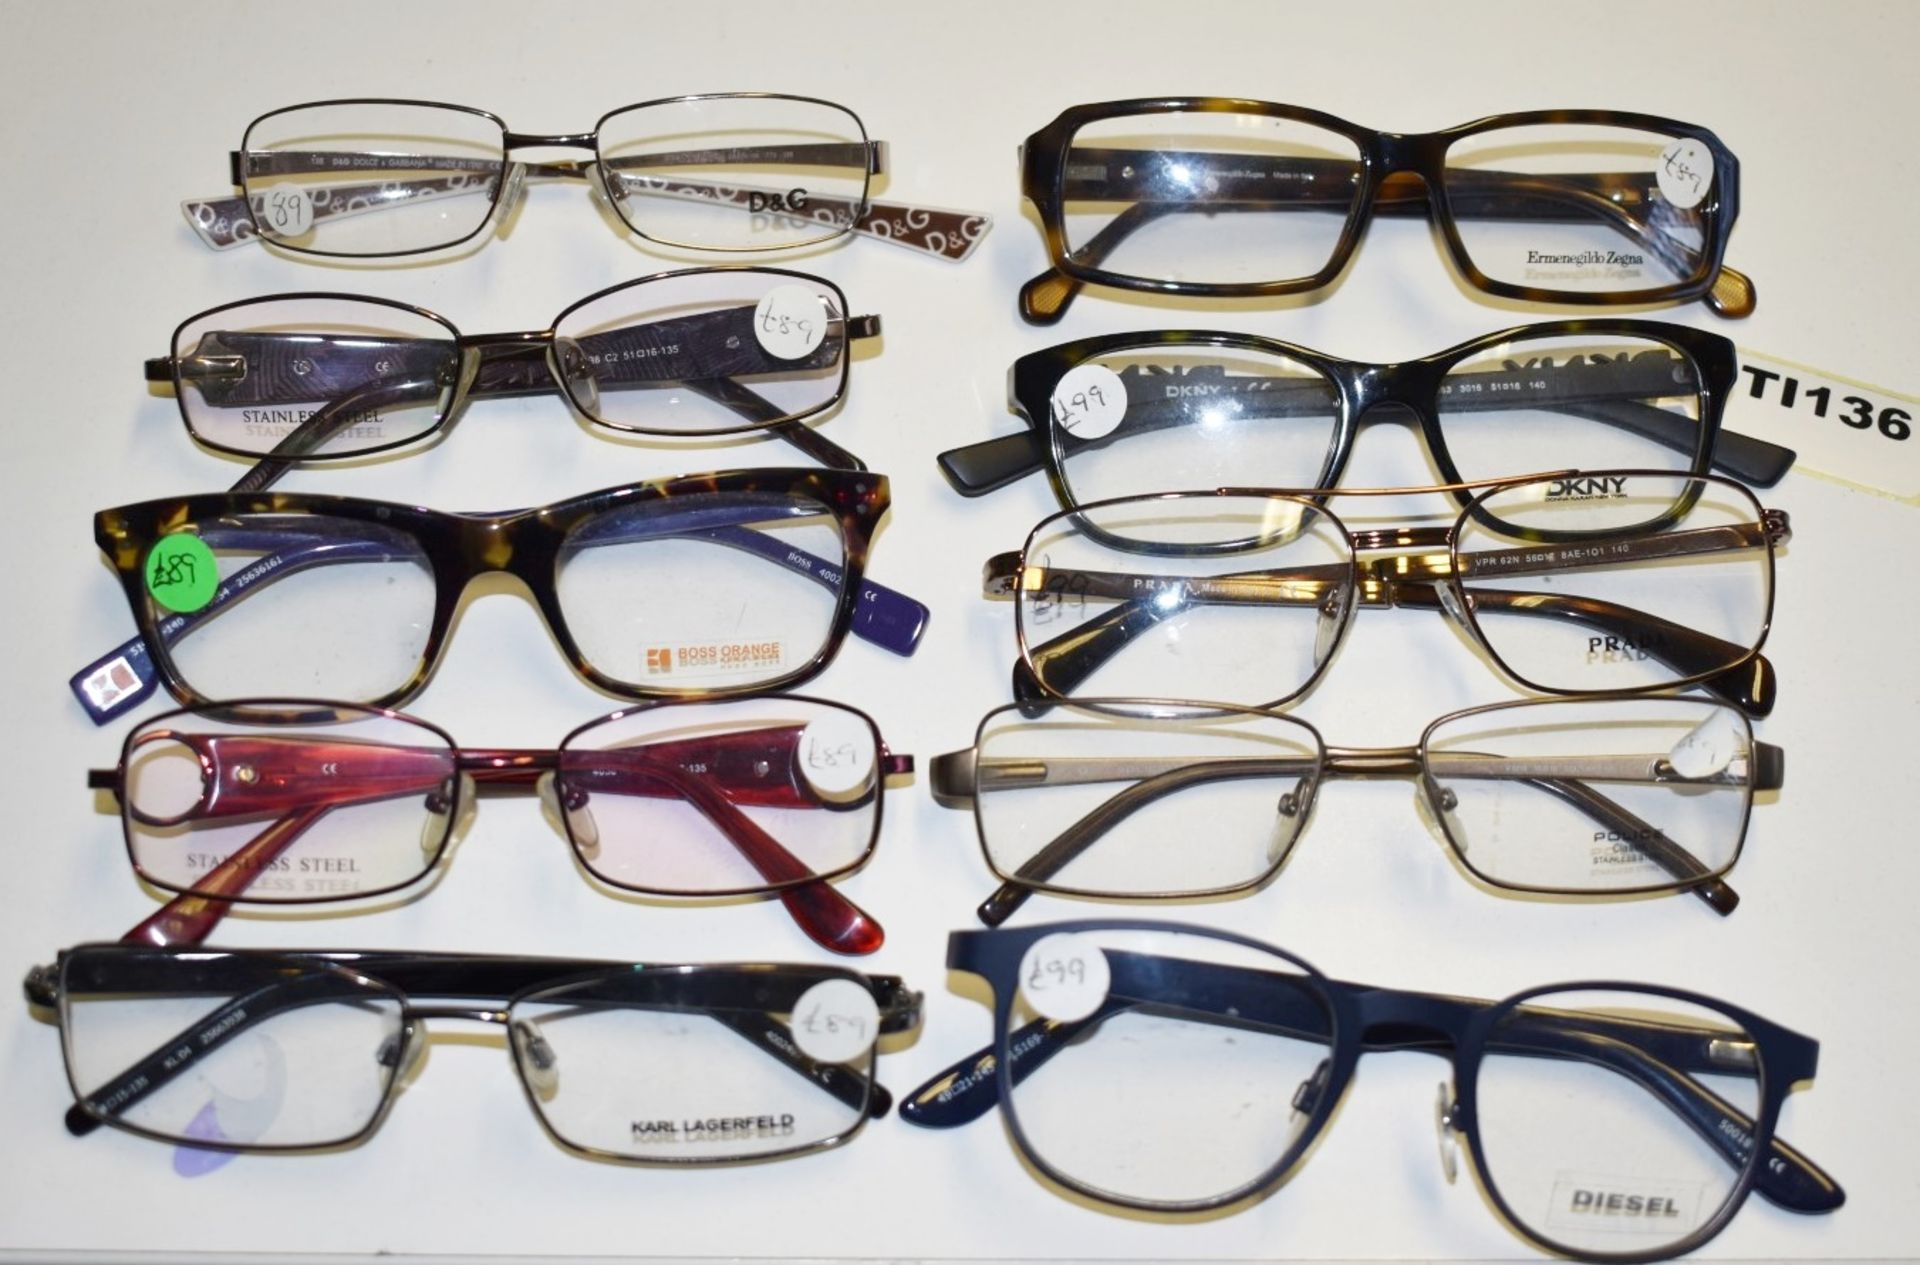 10 x Assorted Pairs of Designer Spectacle Eye Glasses - Ex Display Stock - Brands Include